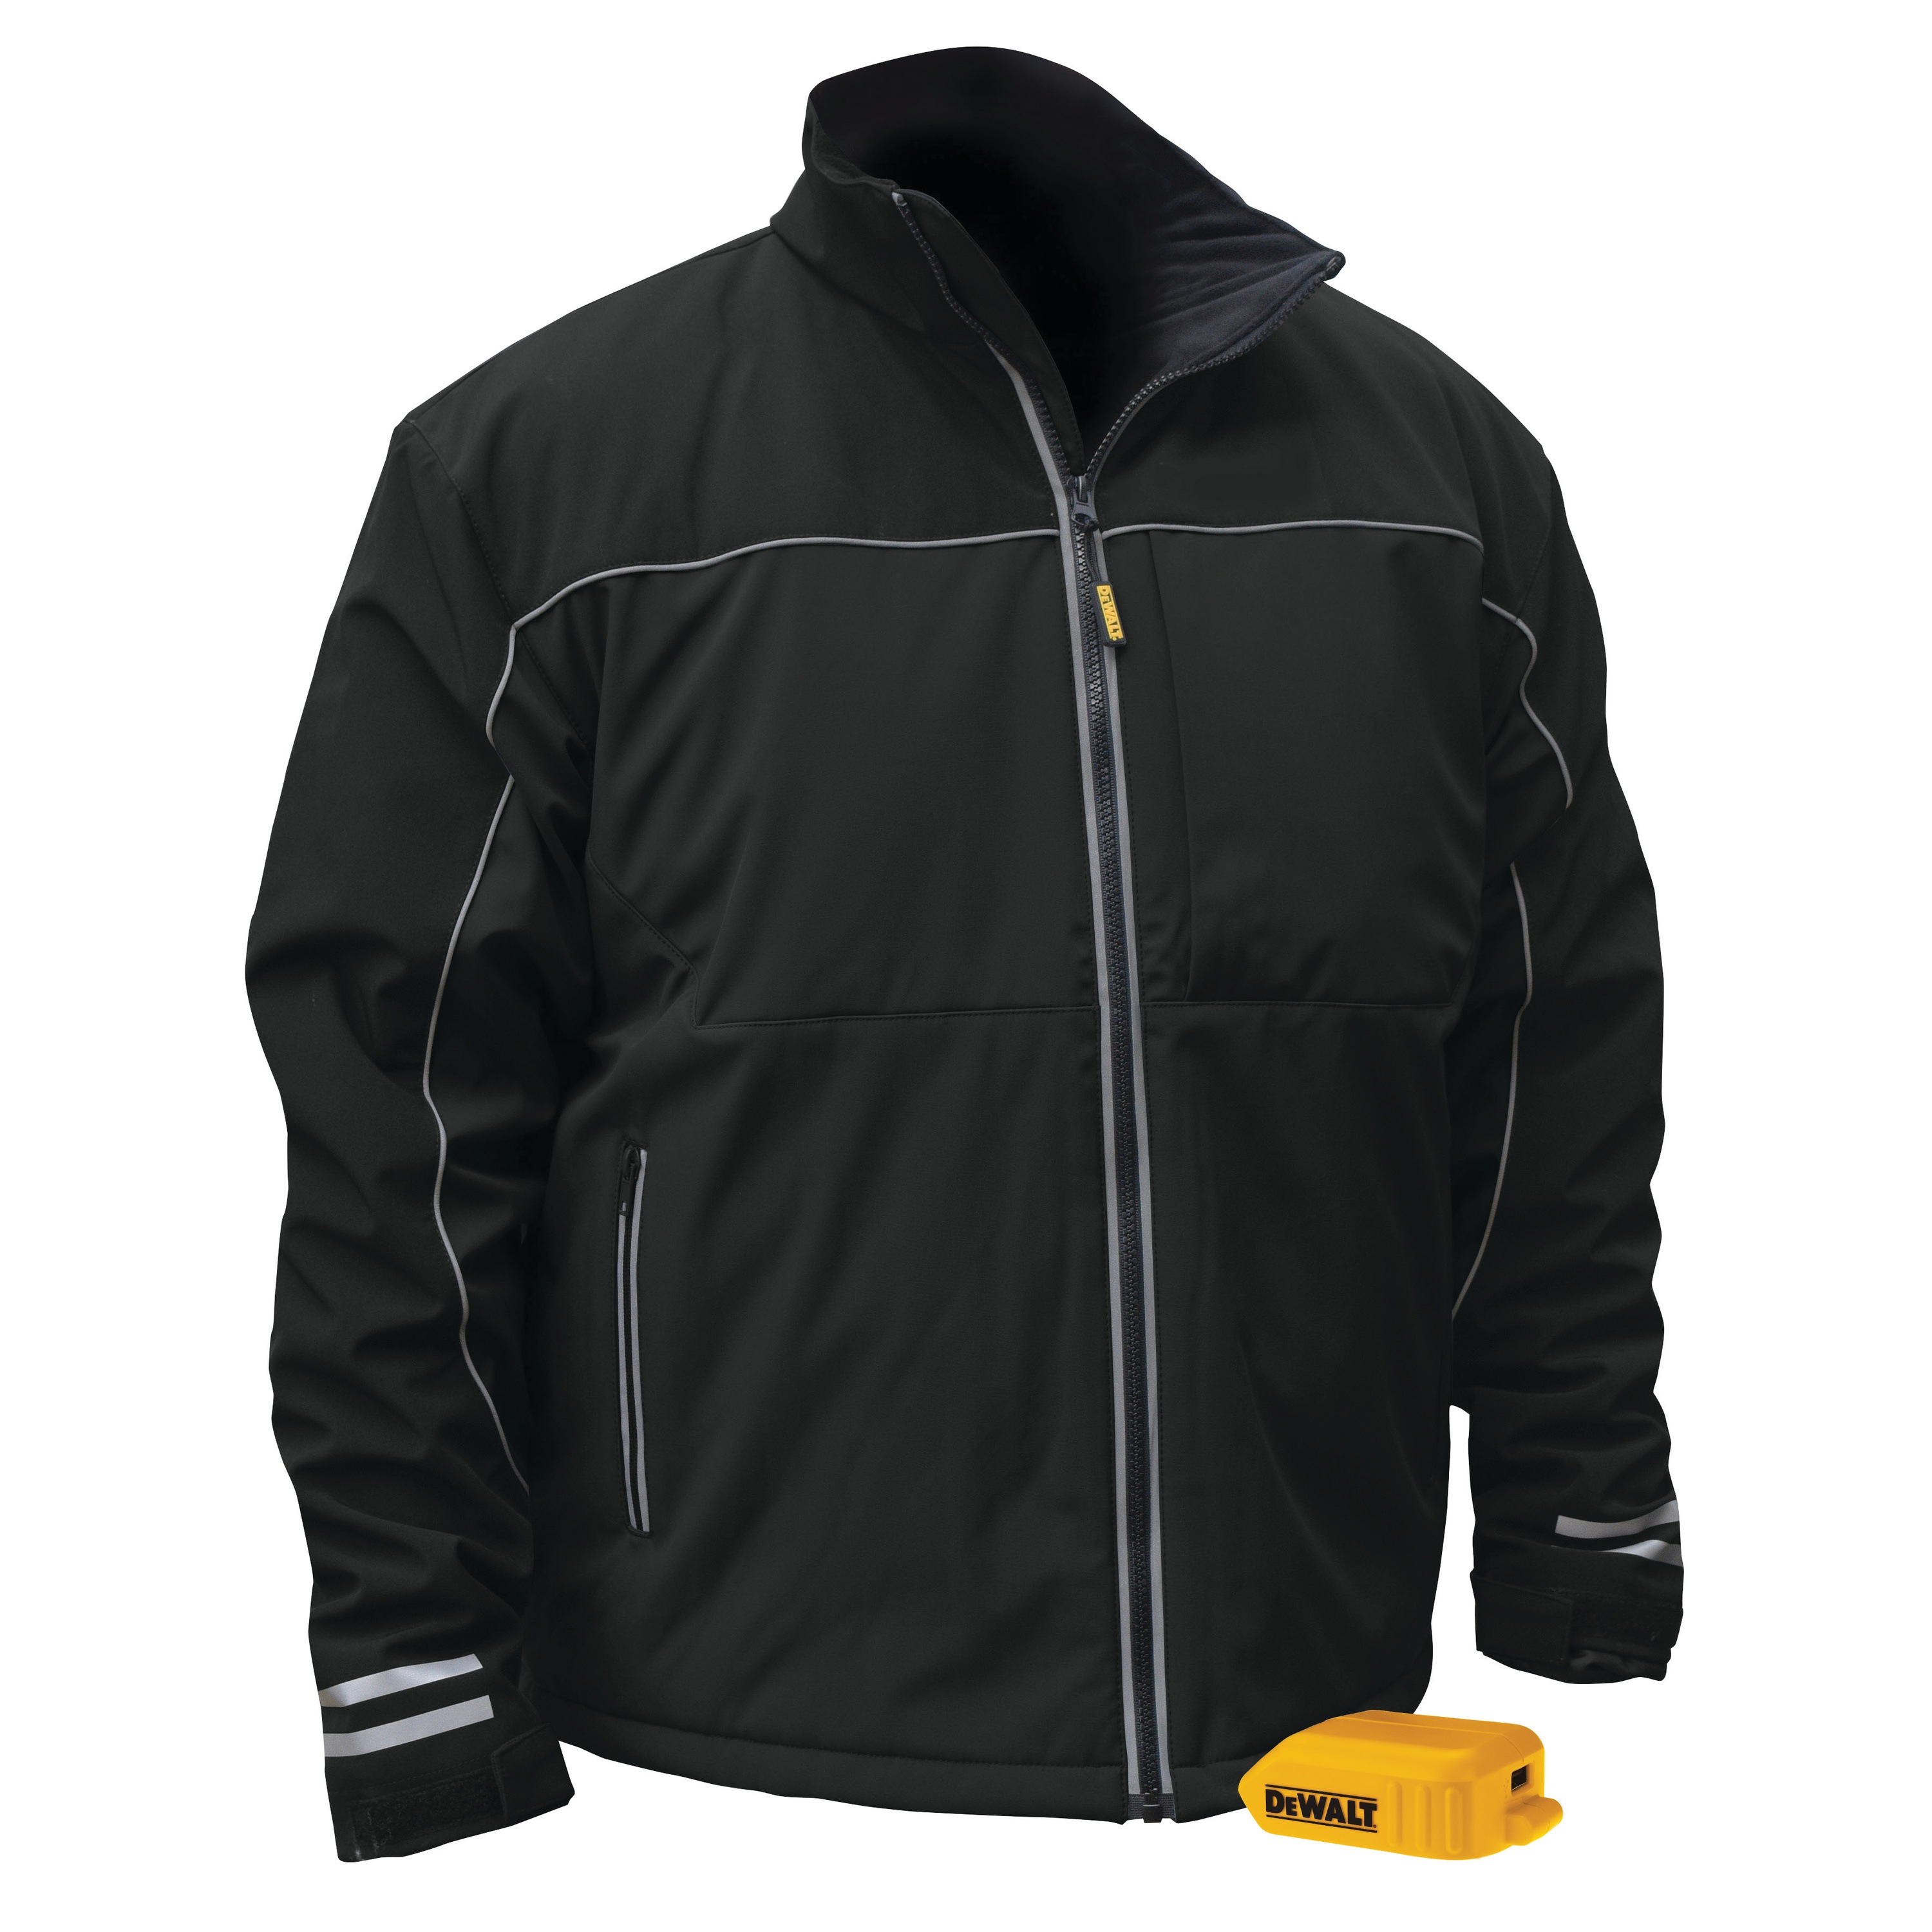 Profile of  lightweight heated jacket with its adapter